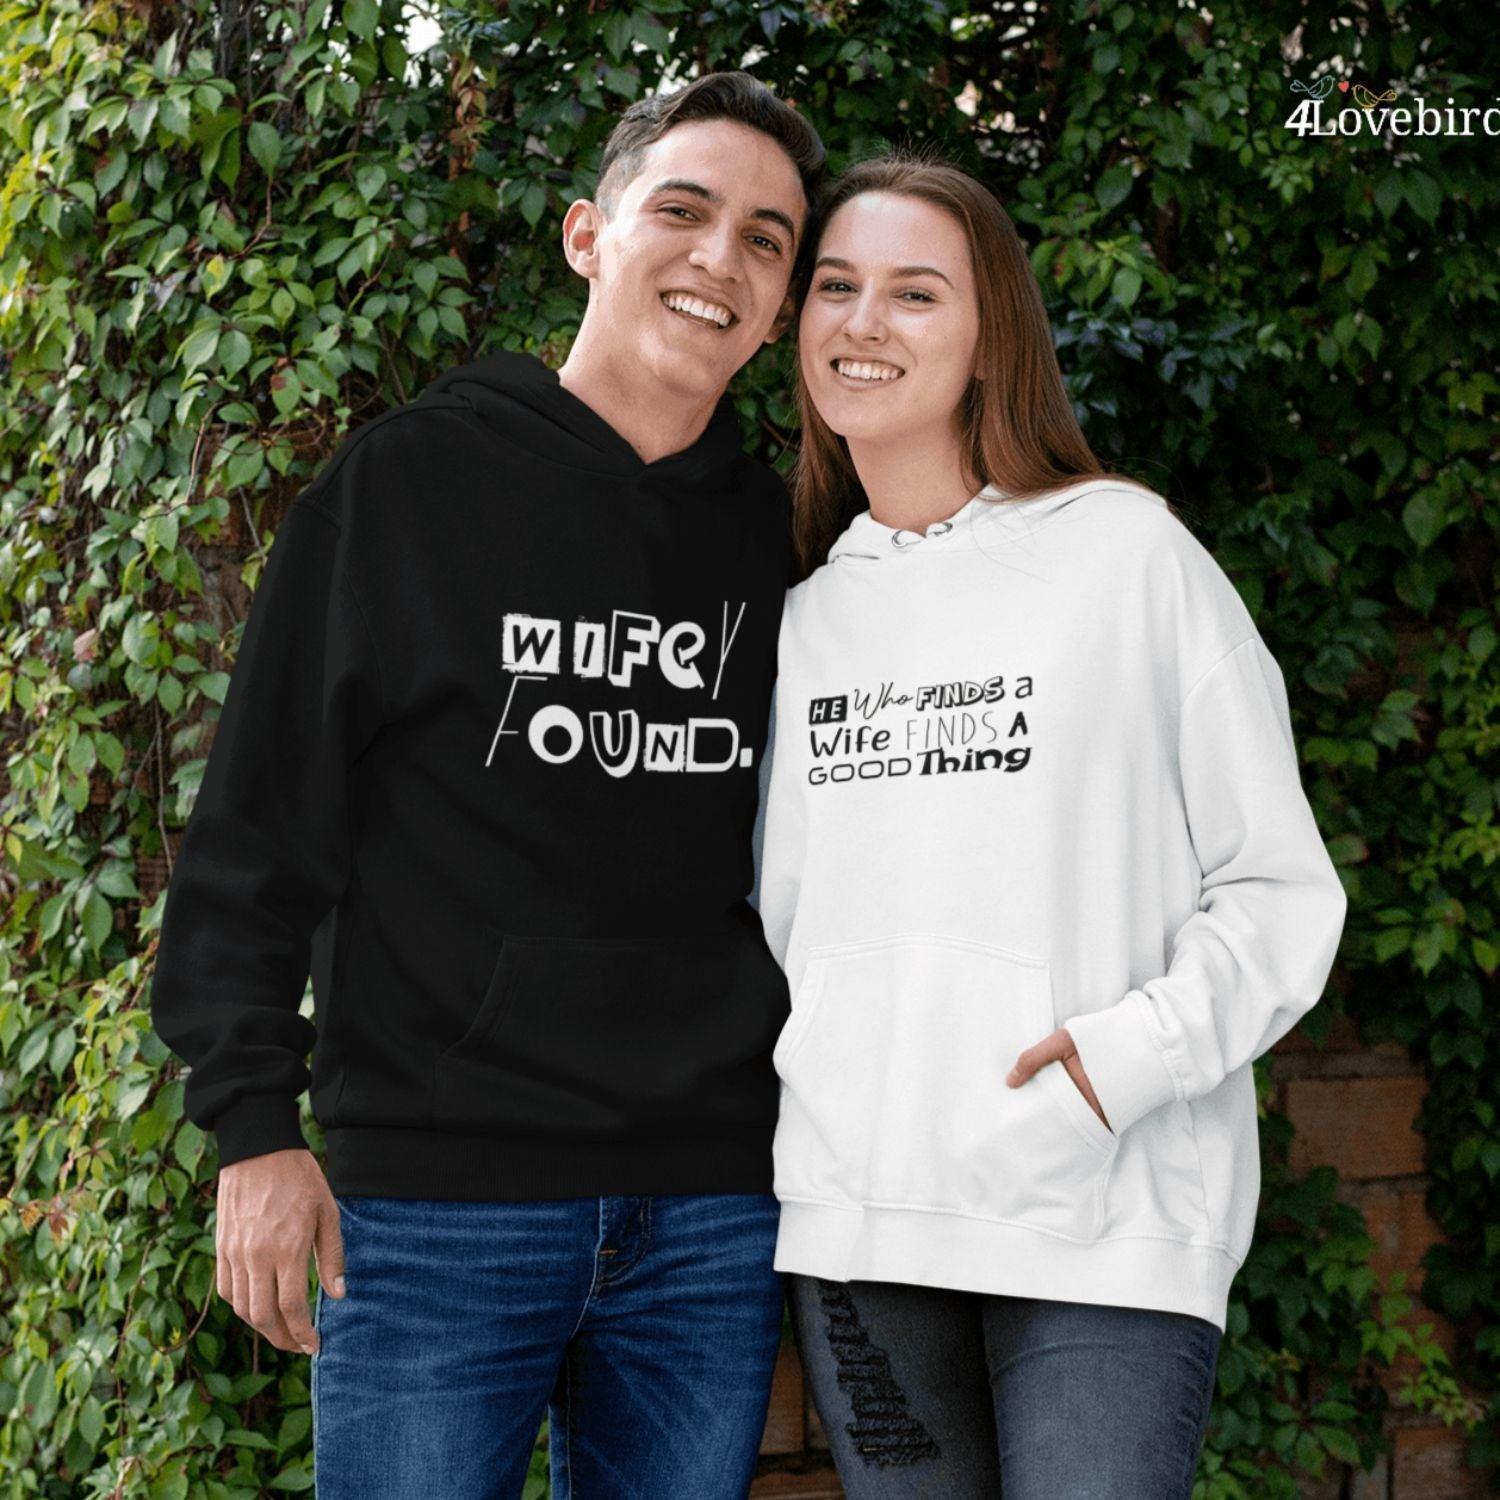 Matching Couples Outfits: Wifey Found Tops, Anniversary Sets & More - 4Lovebirds